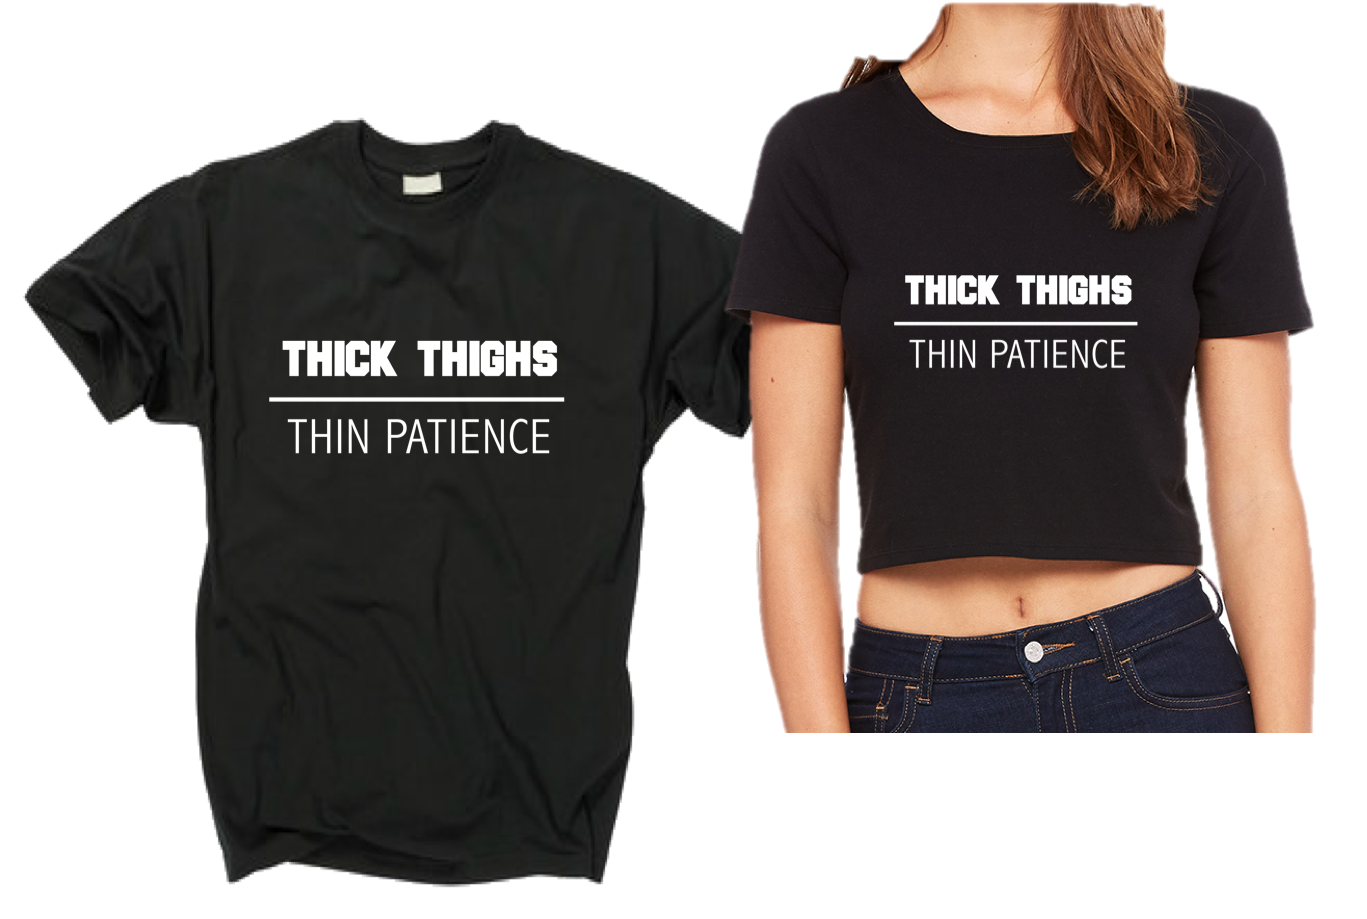 THICK THIGHS X THIN PATIENCE